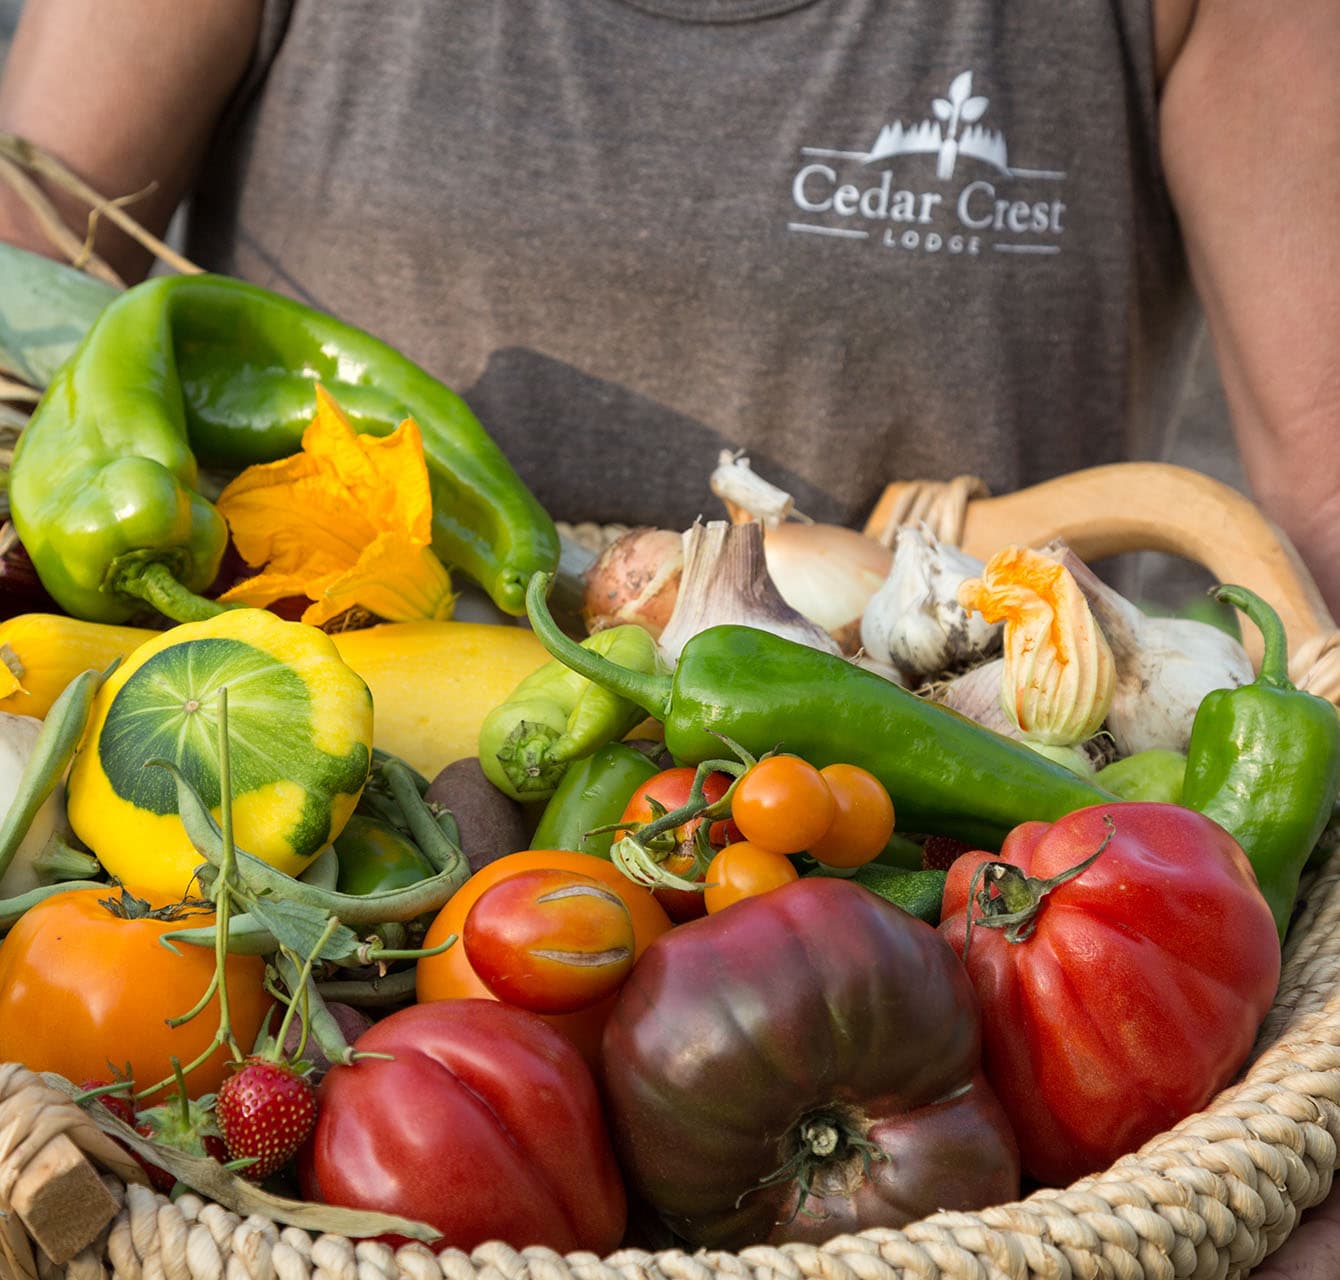 Woman in Cedar Crest Lodge shirt carrying basket full to bursting with freshly-picked vegetables